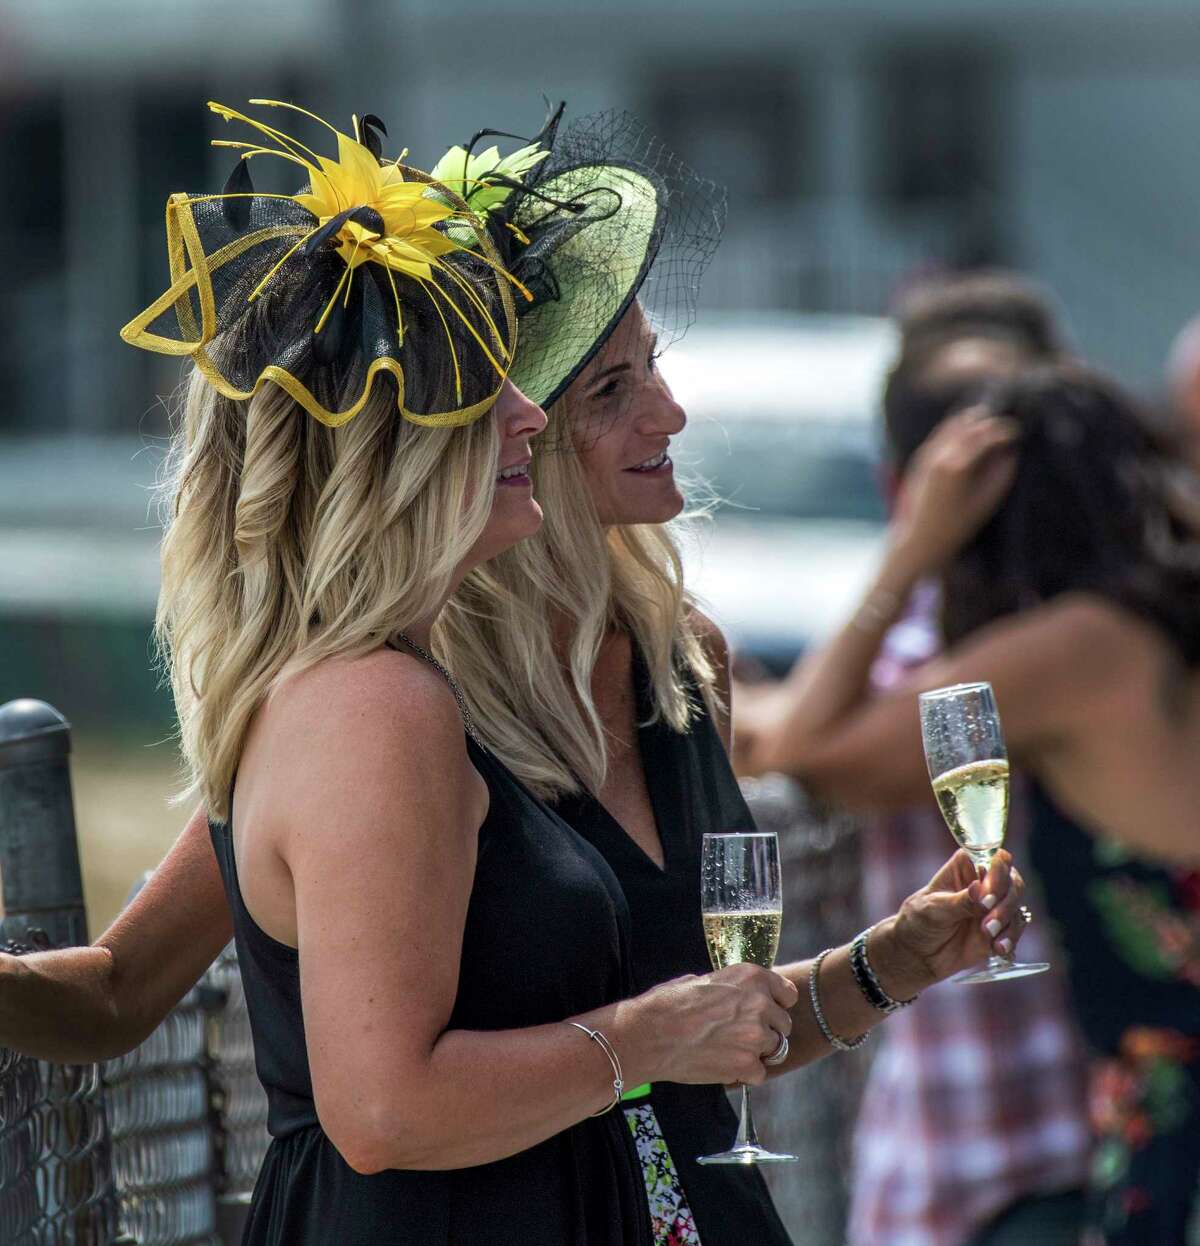 As good weather prevails so far today the stylish hats come out at the Saratoga Race Course Saturday July 28, 2018 in Saratoga Springs, N.Y. (Skip Dickstein/Times Union)